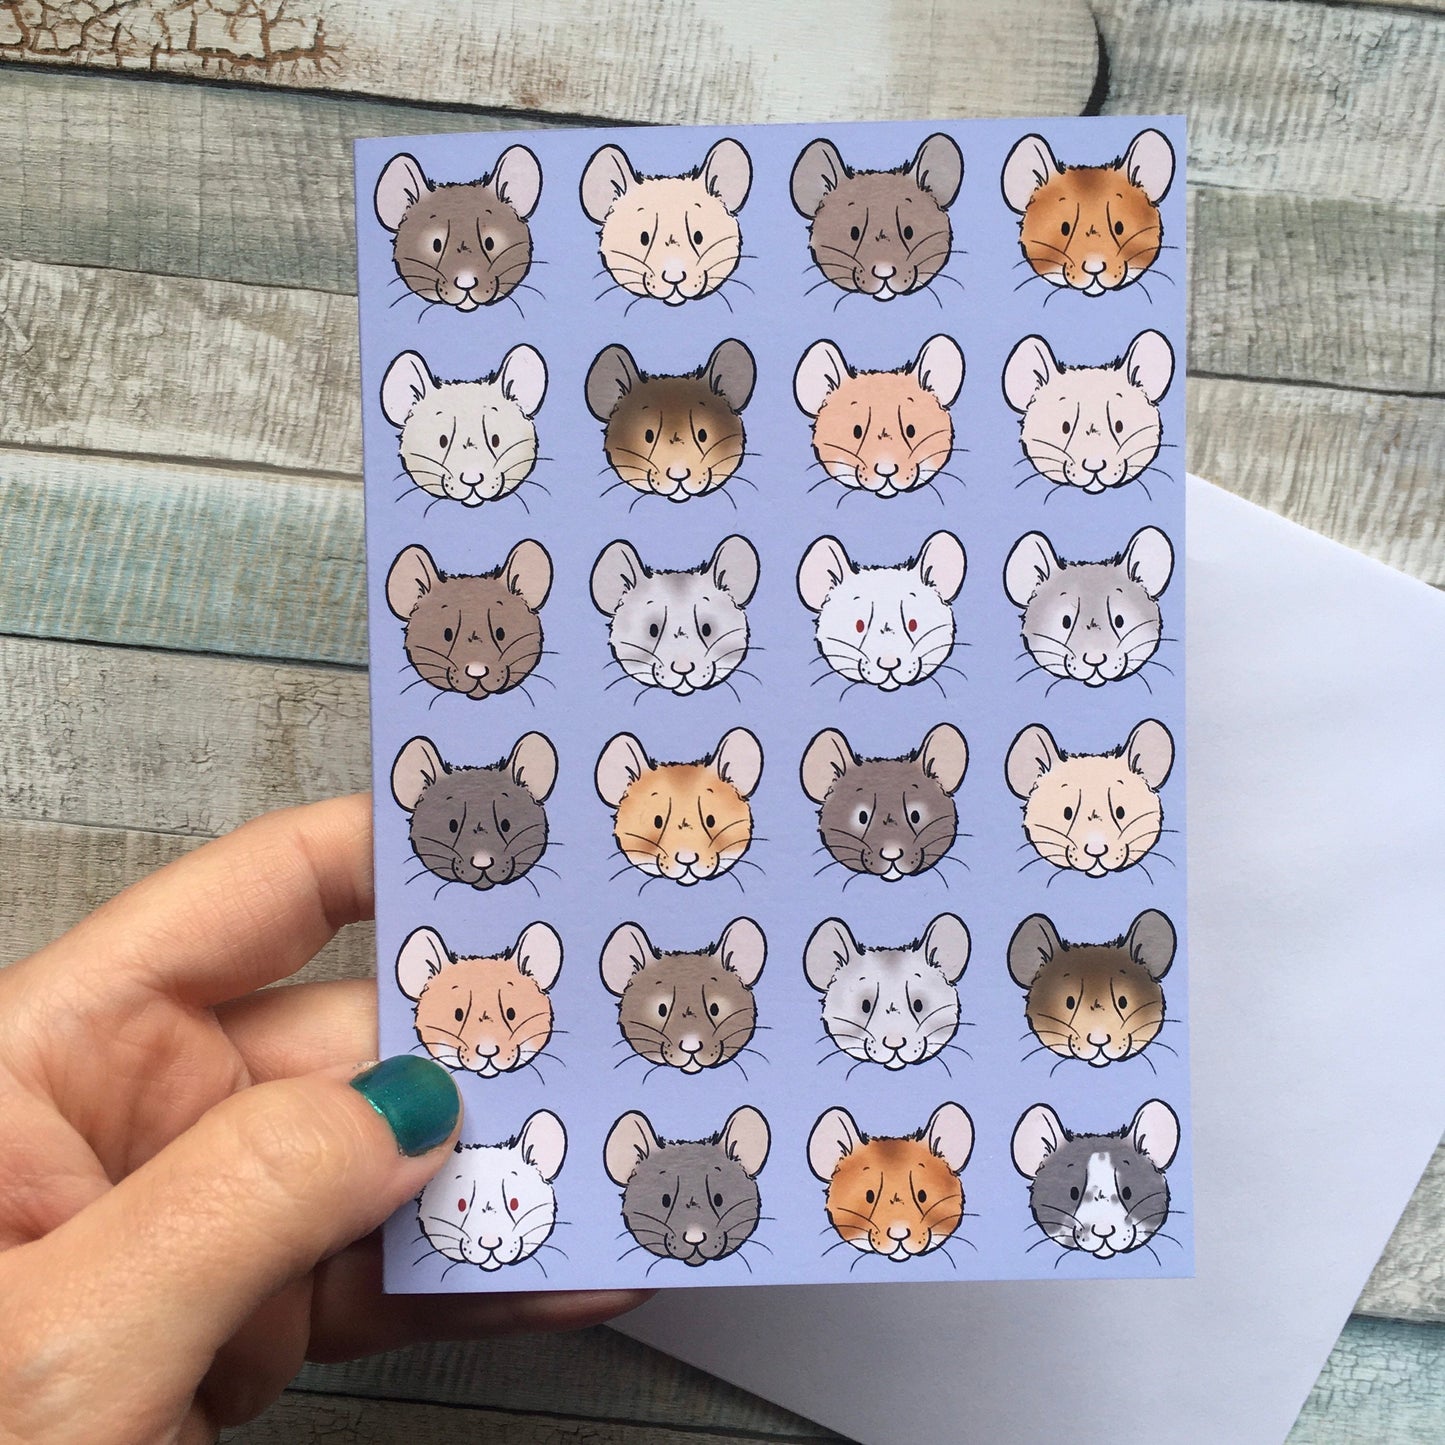 Hamster Faces Greeting Card, A6 Blank Greeting card, Cute Hamster Gift Card